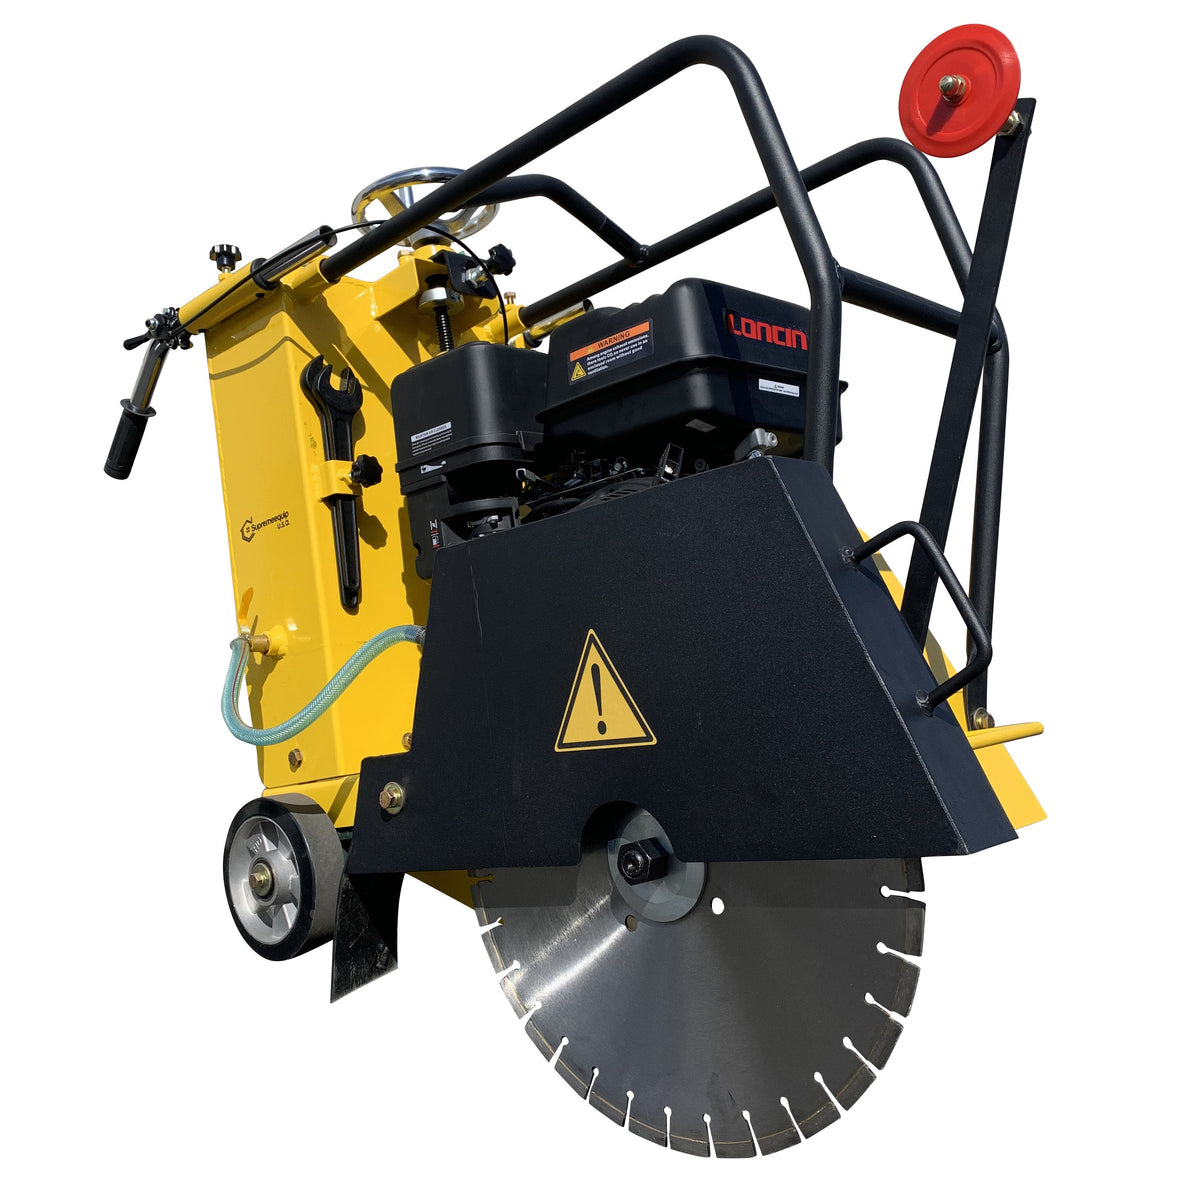 Commercial 18" walk-behind concrete saw cement walk behind 13HP 4 Strokes